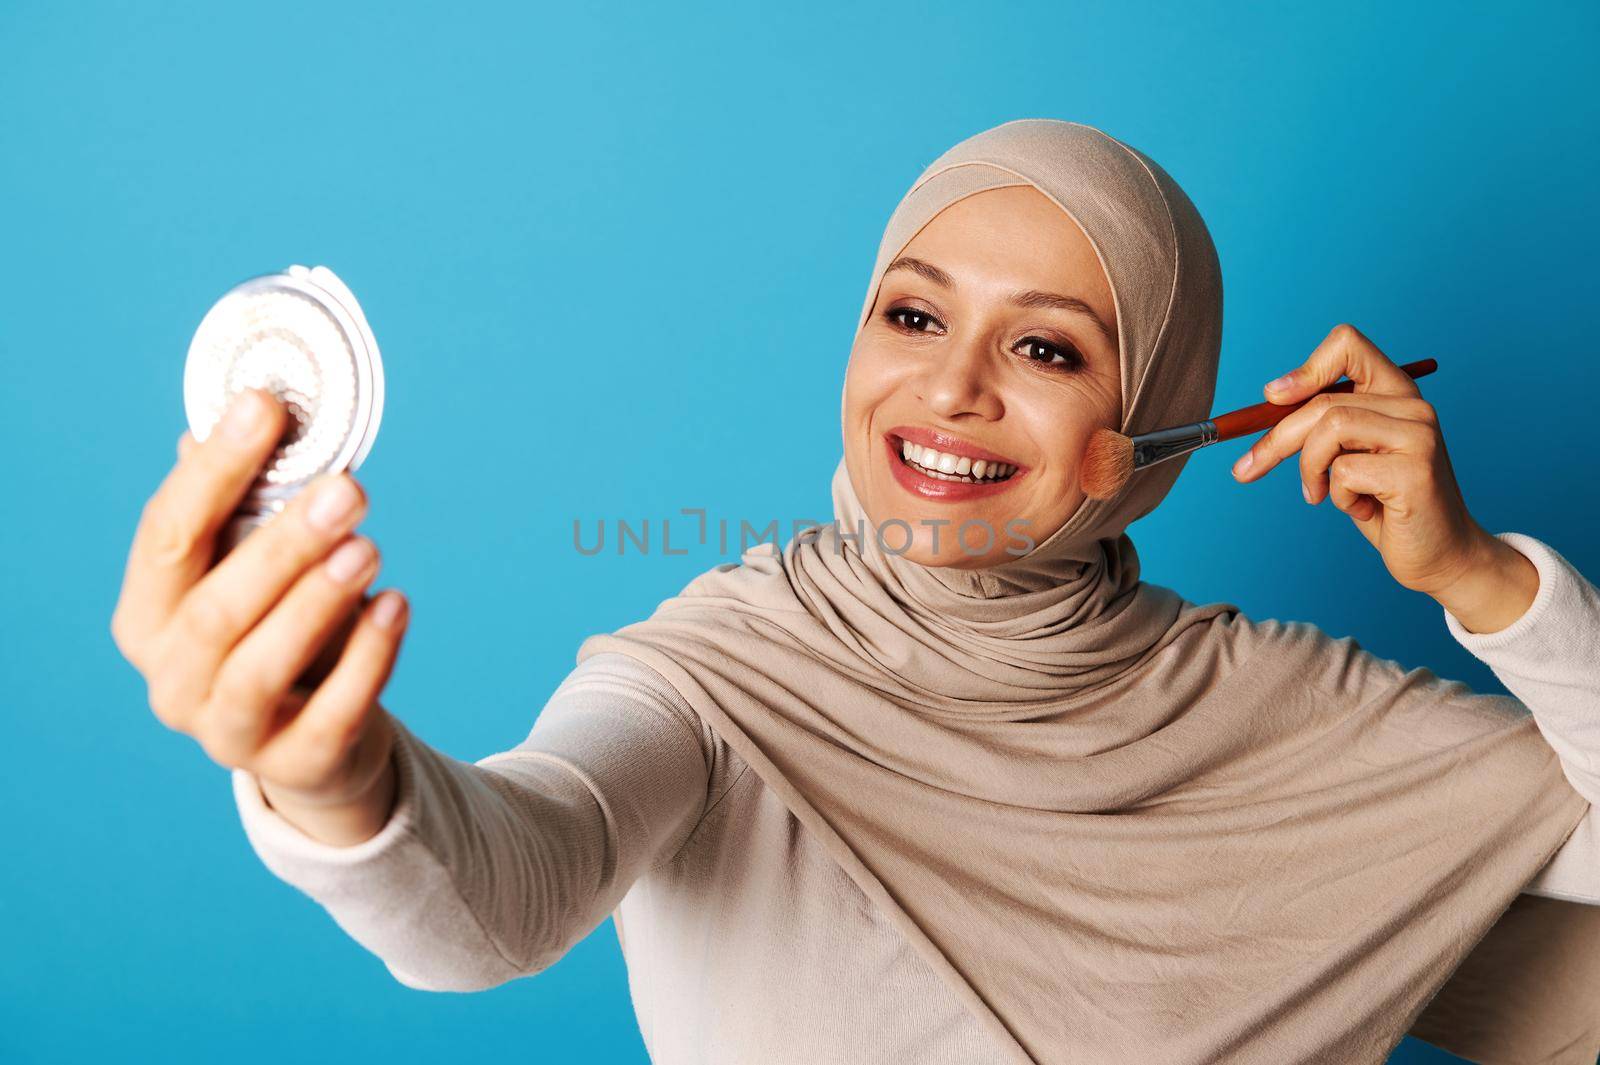 Arab Muslim woman with covered looking at mirror and applying make up, isolated on blue background with copy space